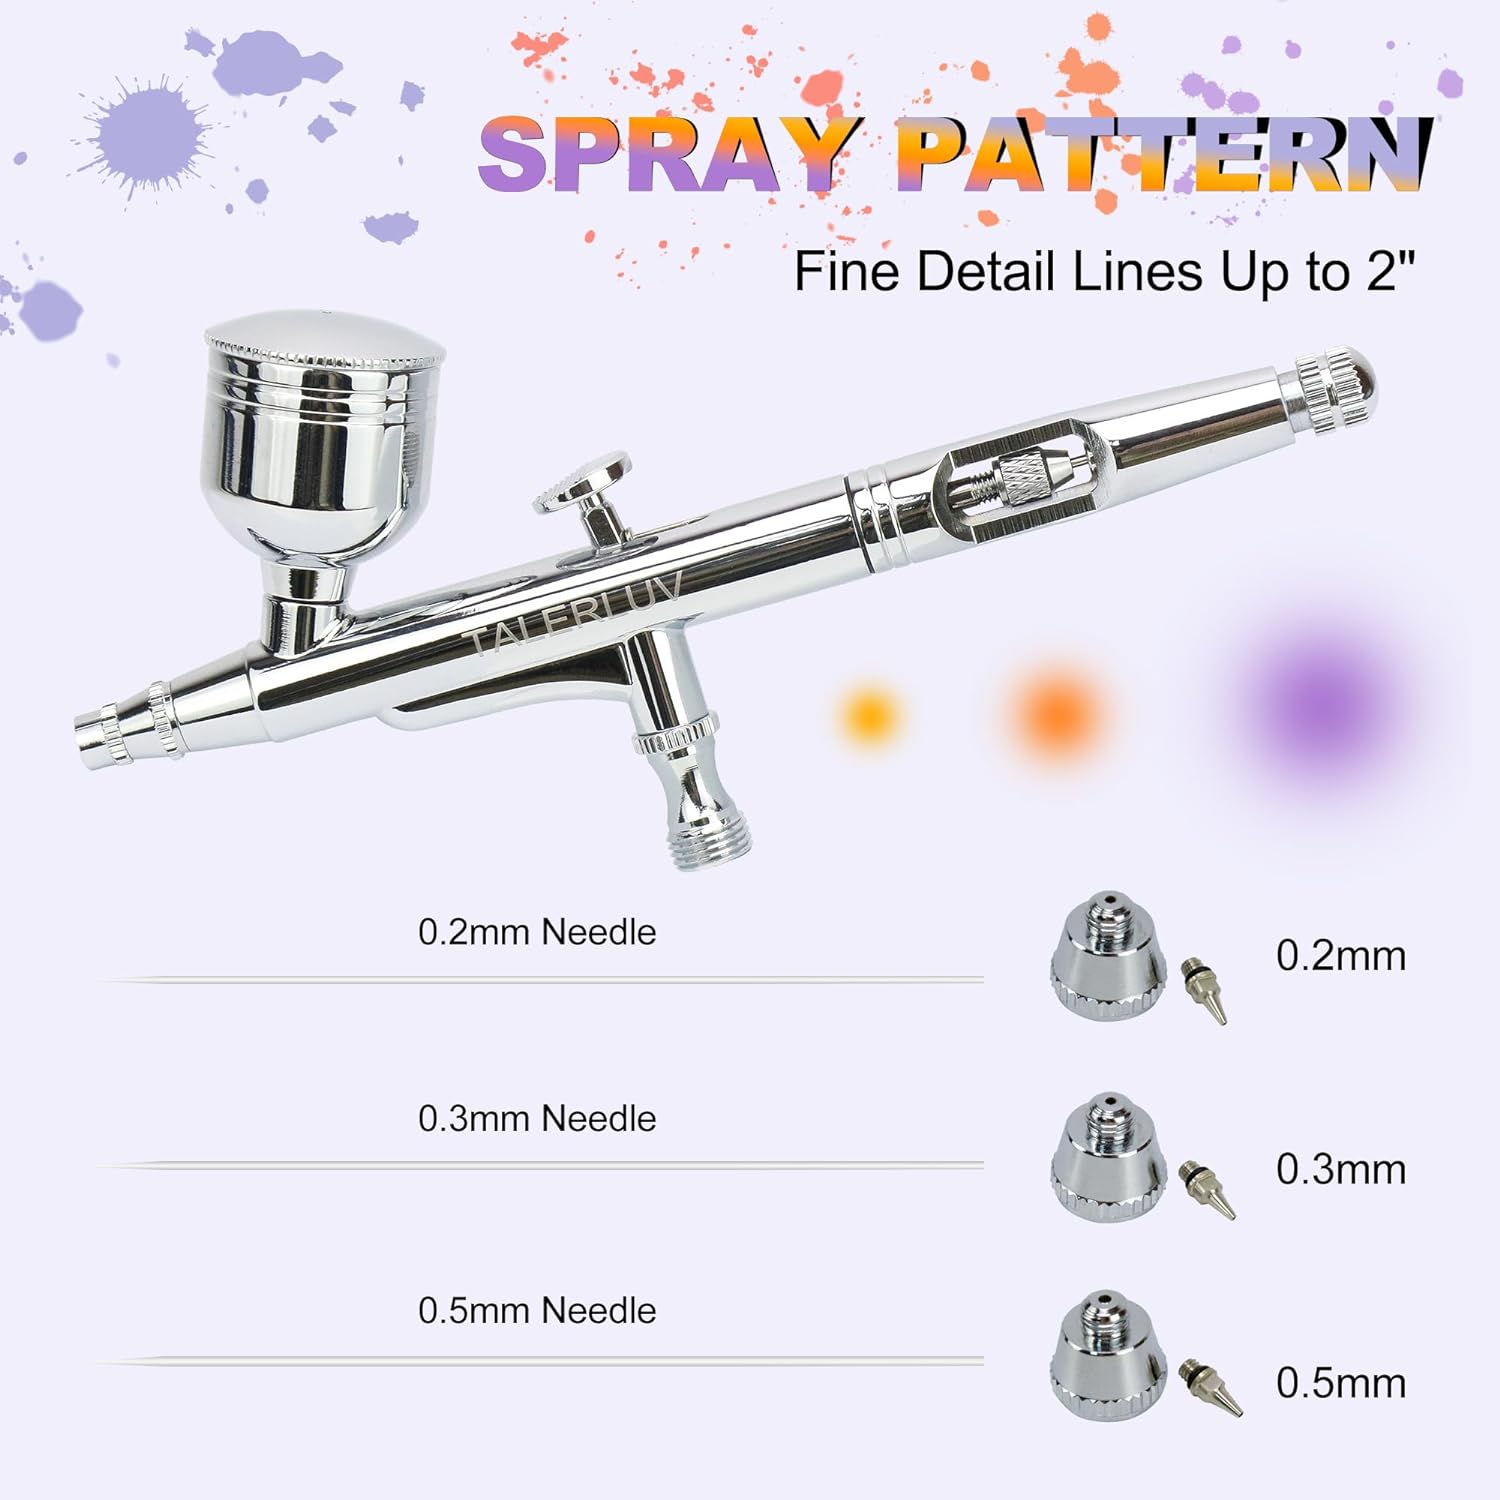 Airbrush Kit, Dual-Action Gravity Airbrush Gun with 0.2/0.3/0.5mm Needles Set, 7cc/20cc/40cc Cup, Air Hose and Airbrush Cleaning Kit for Makeup Nail Painting Model Coloring Cake Decor Shoes Tattoo